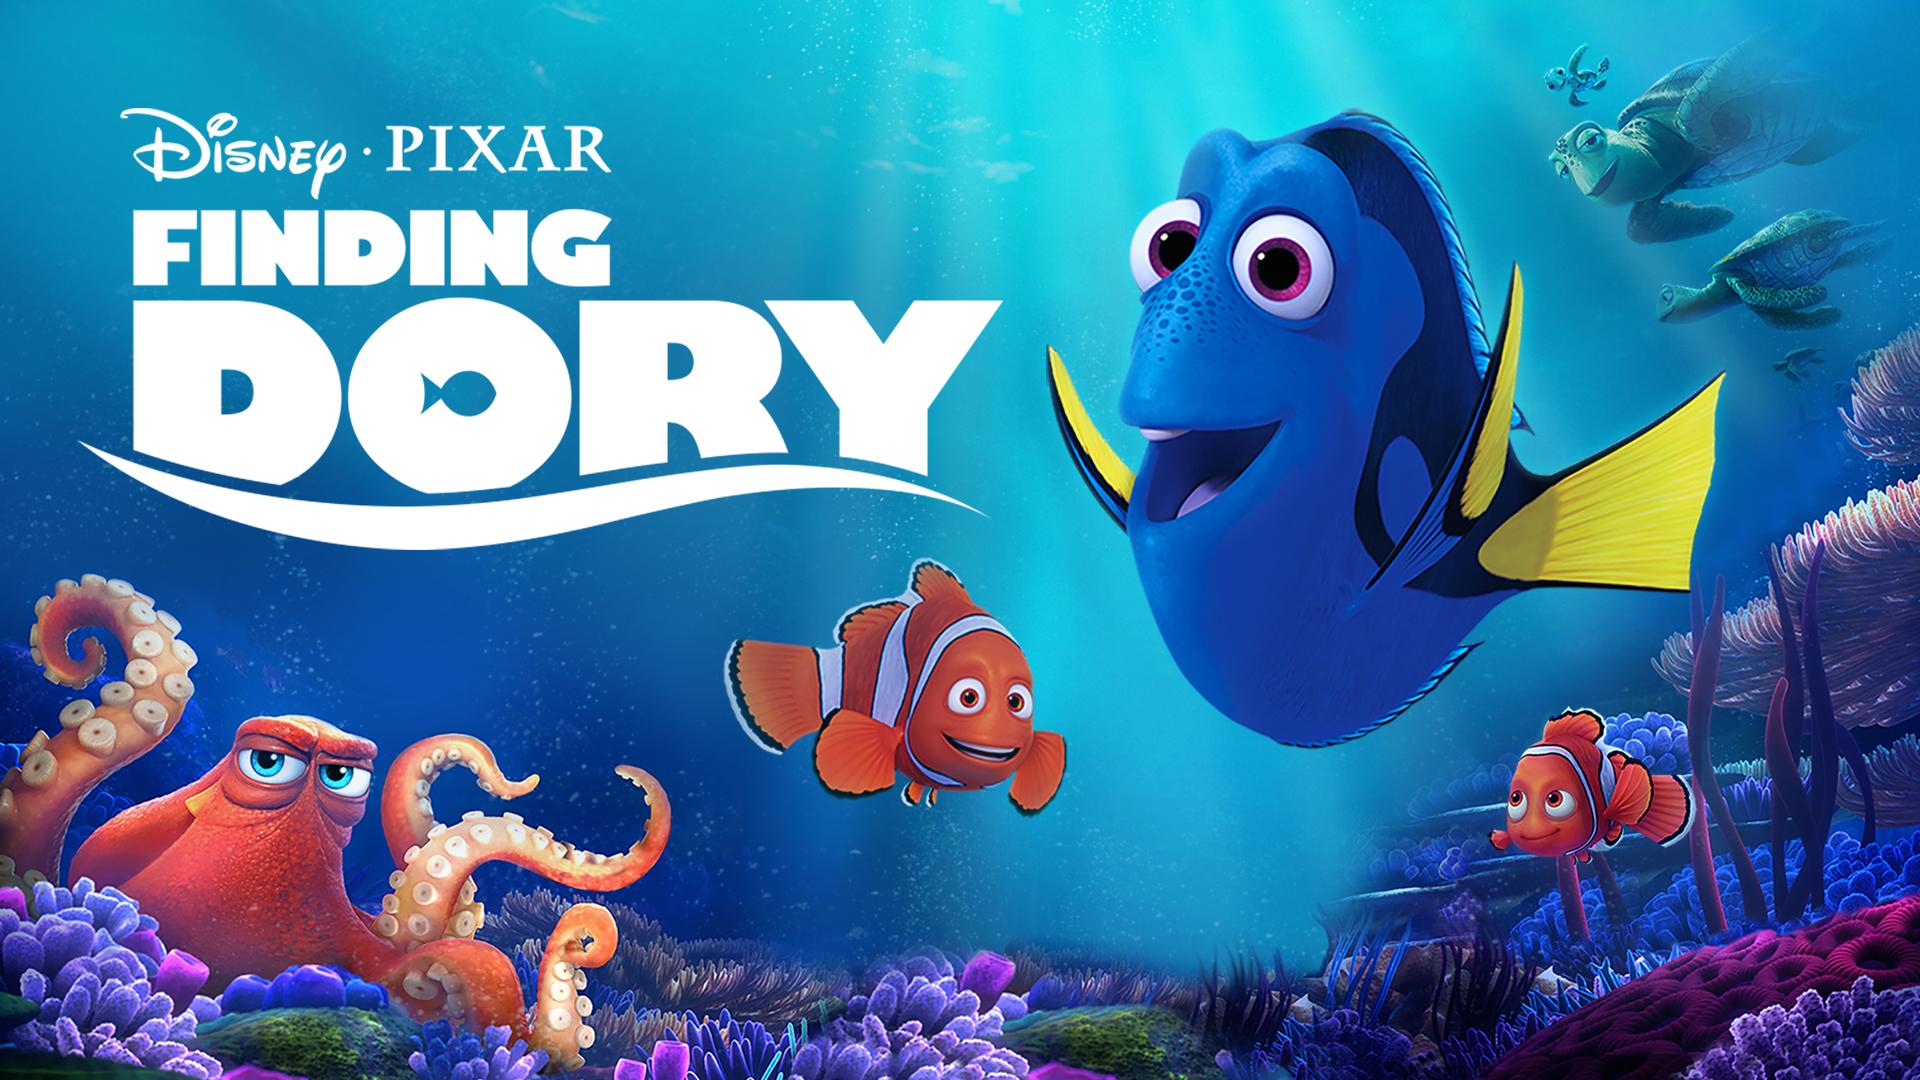 43-facts-about-the-movie-finding-dory